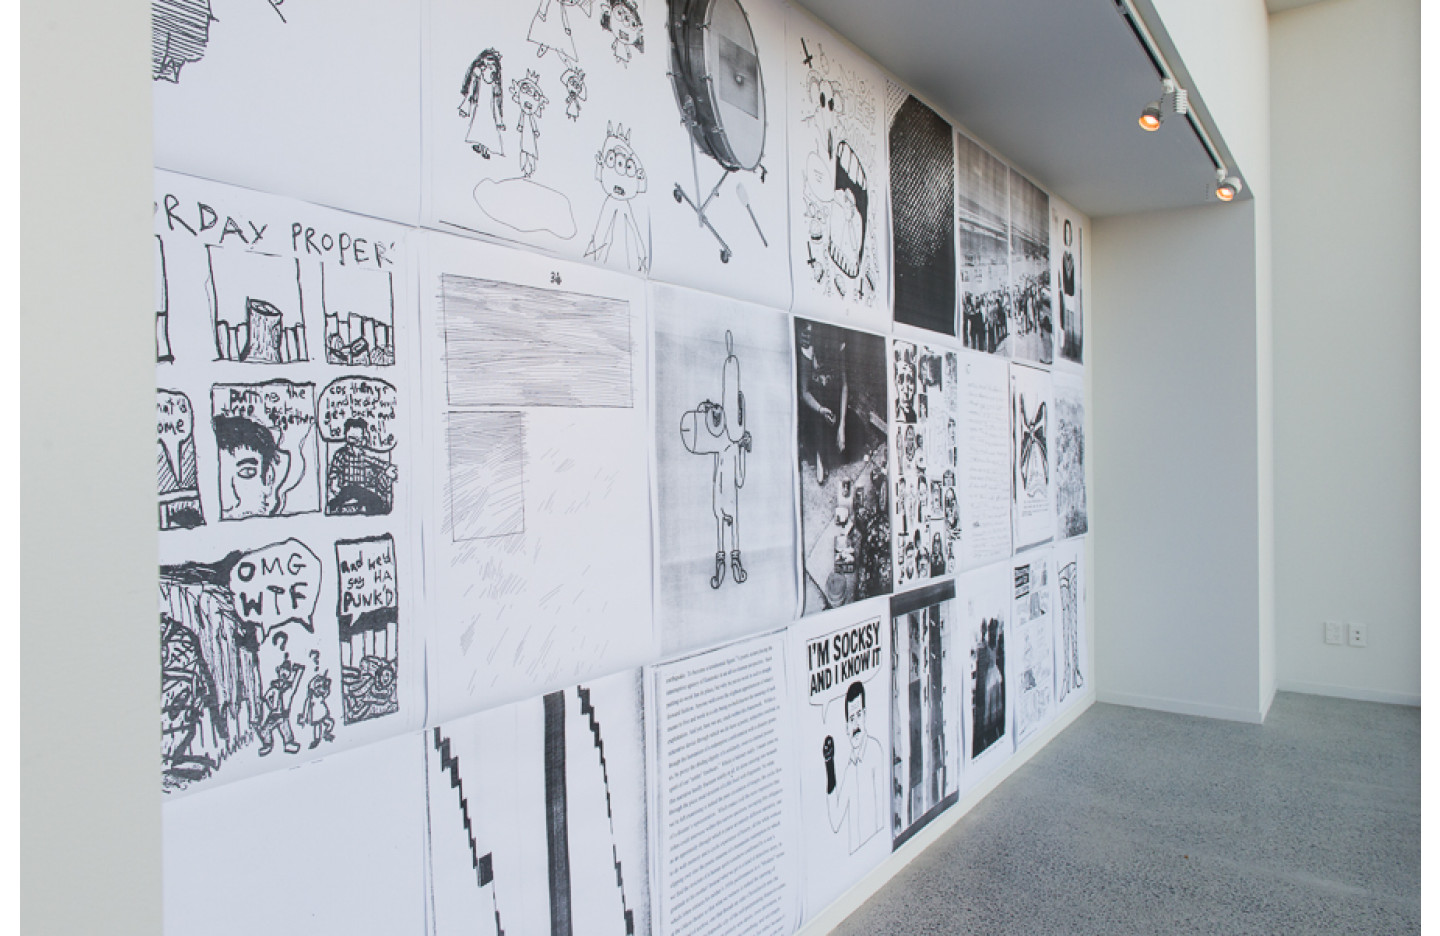 Installation image for 'Small Press', Ramp Gallery May 2014. Curated by Kim Paton & Bryce Galloway